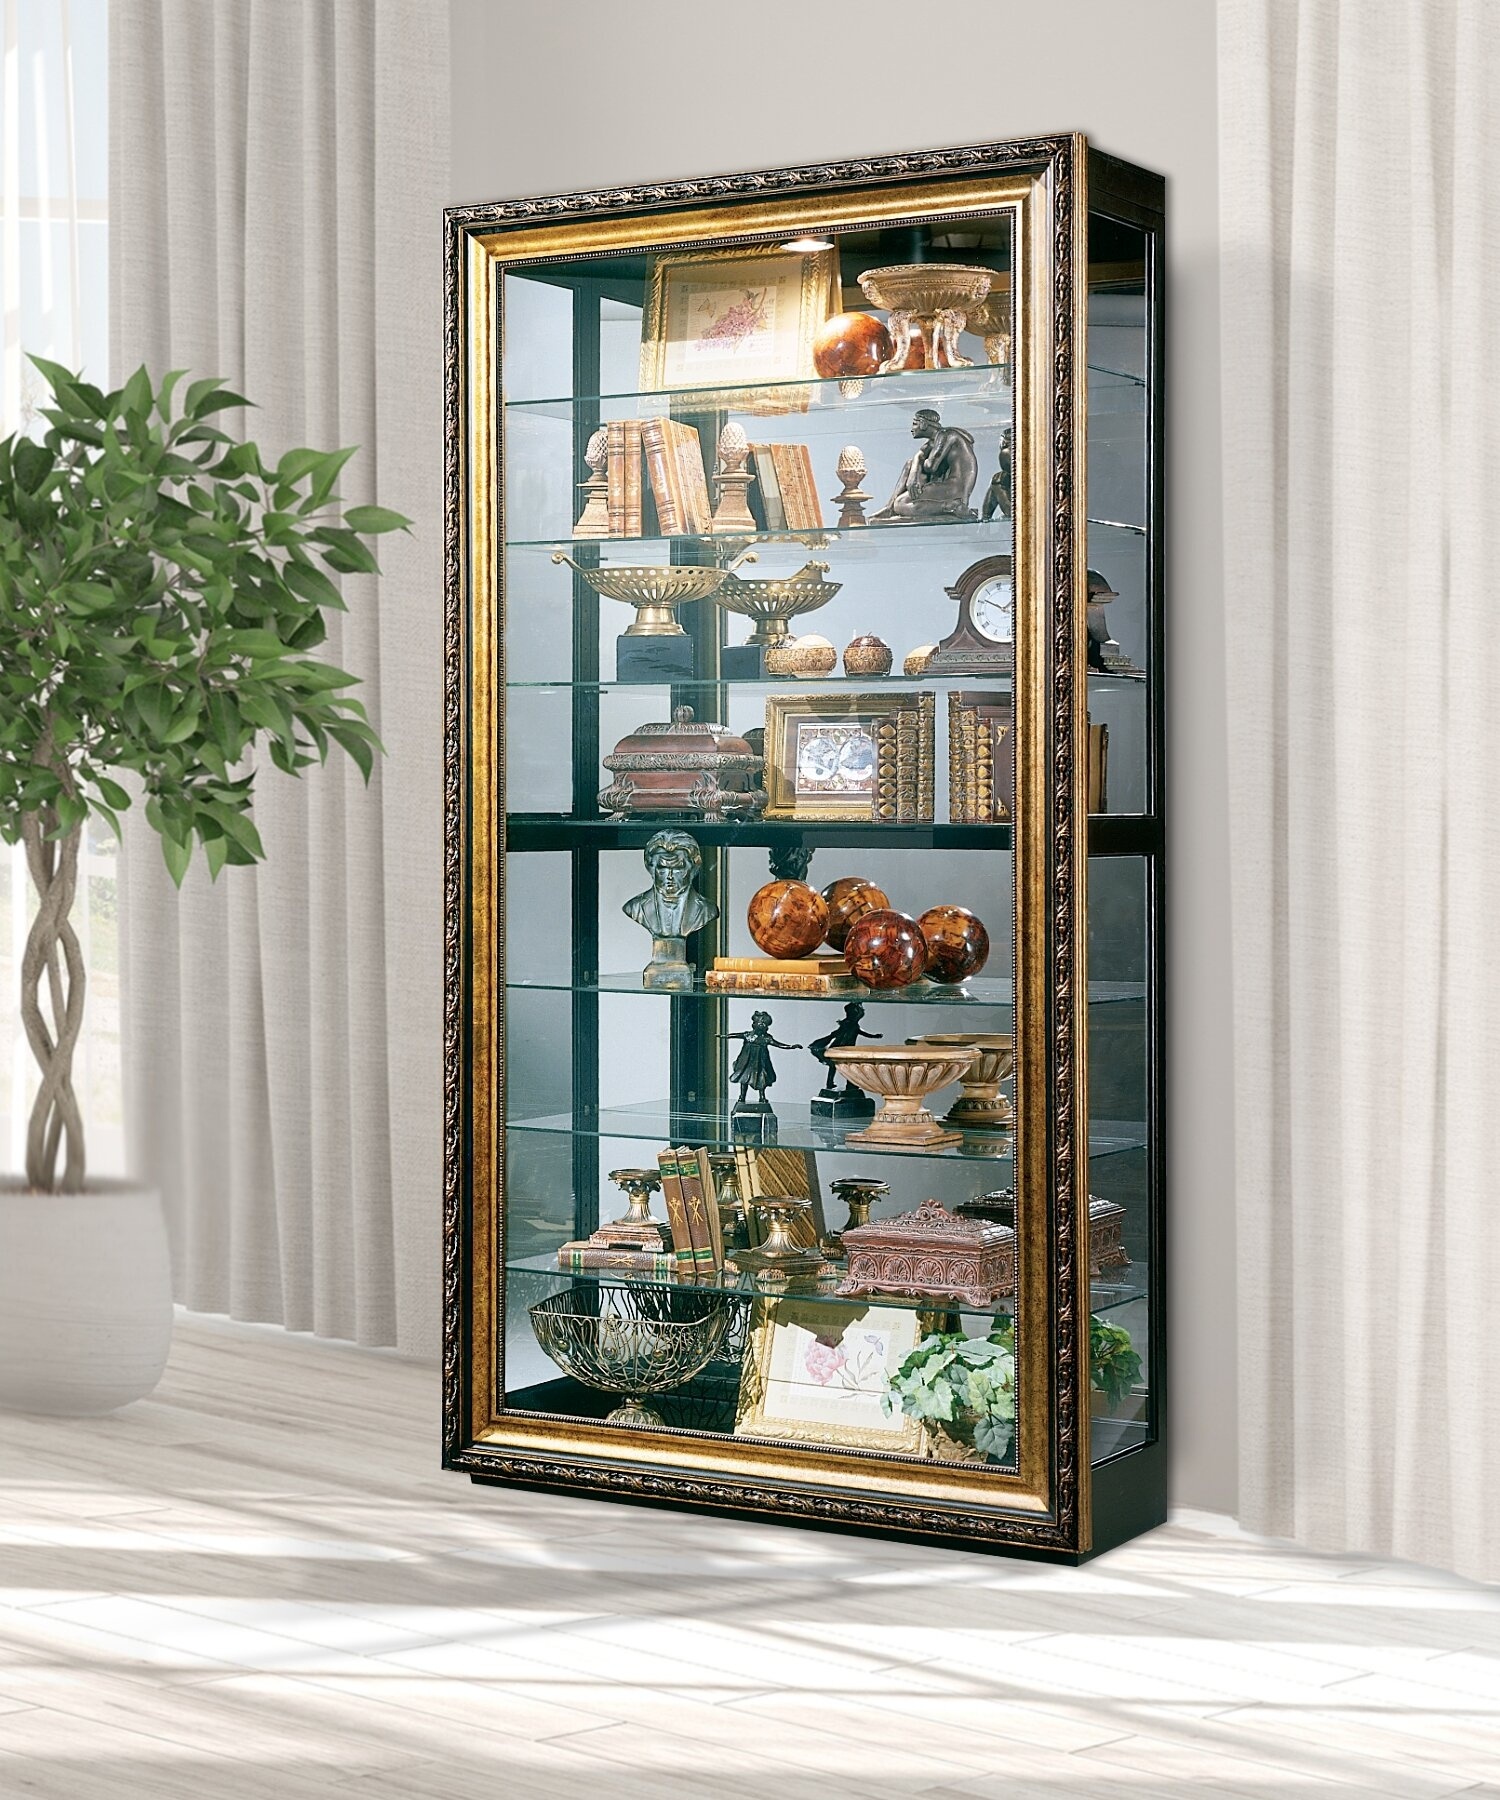 CURIO small glass display case for collectibles